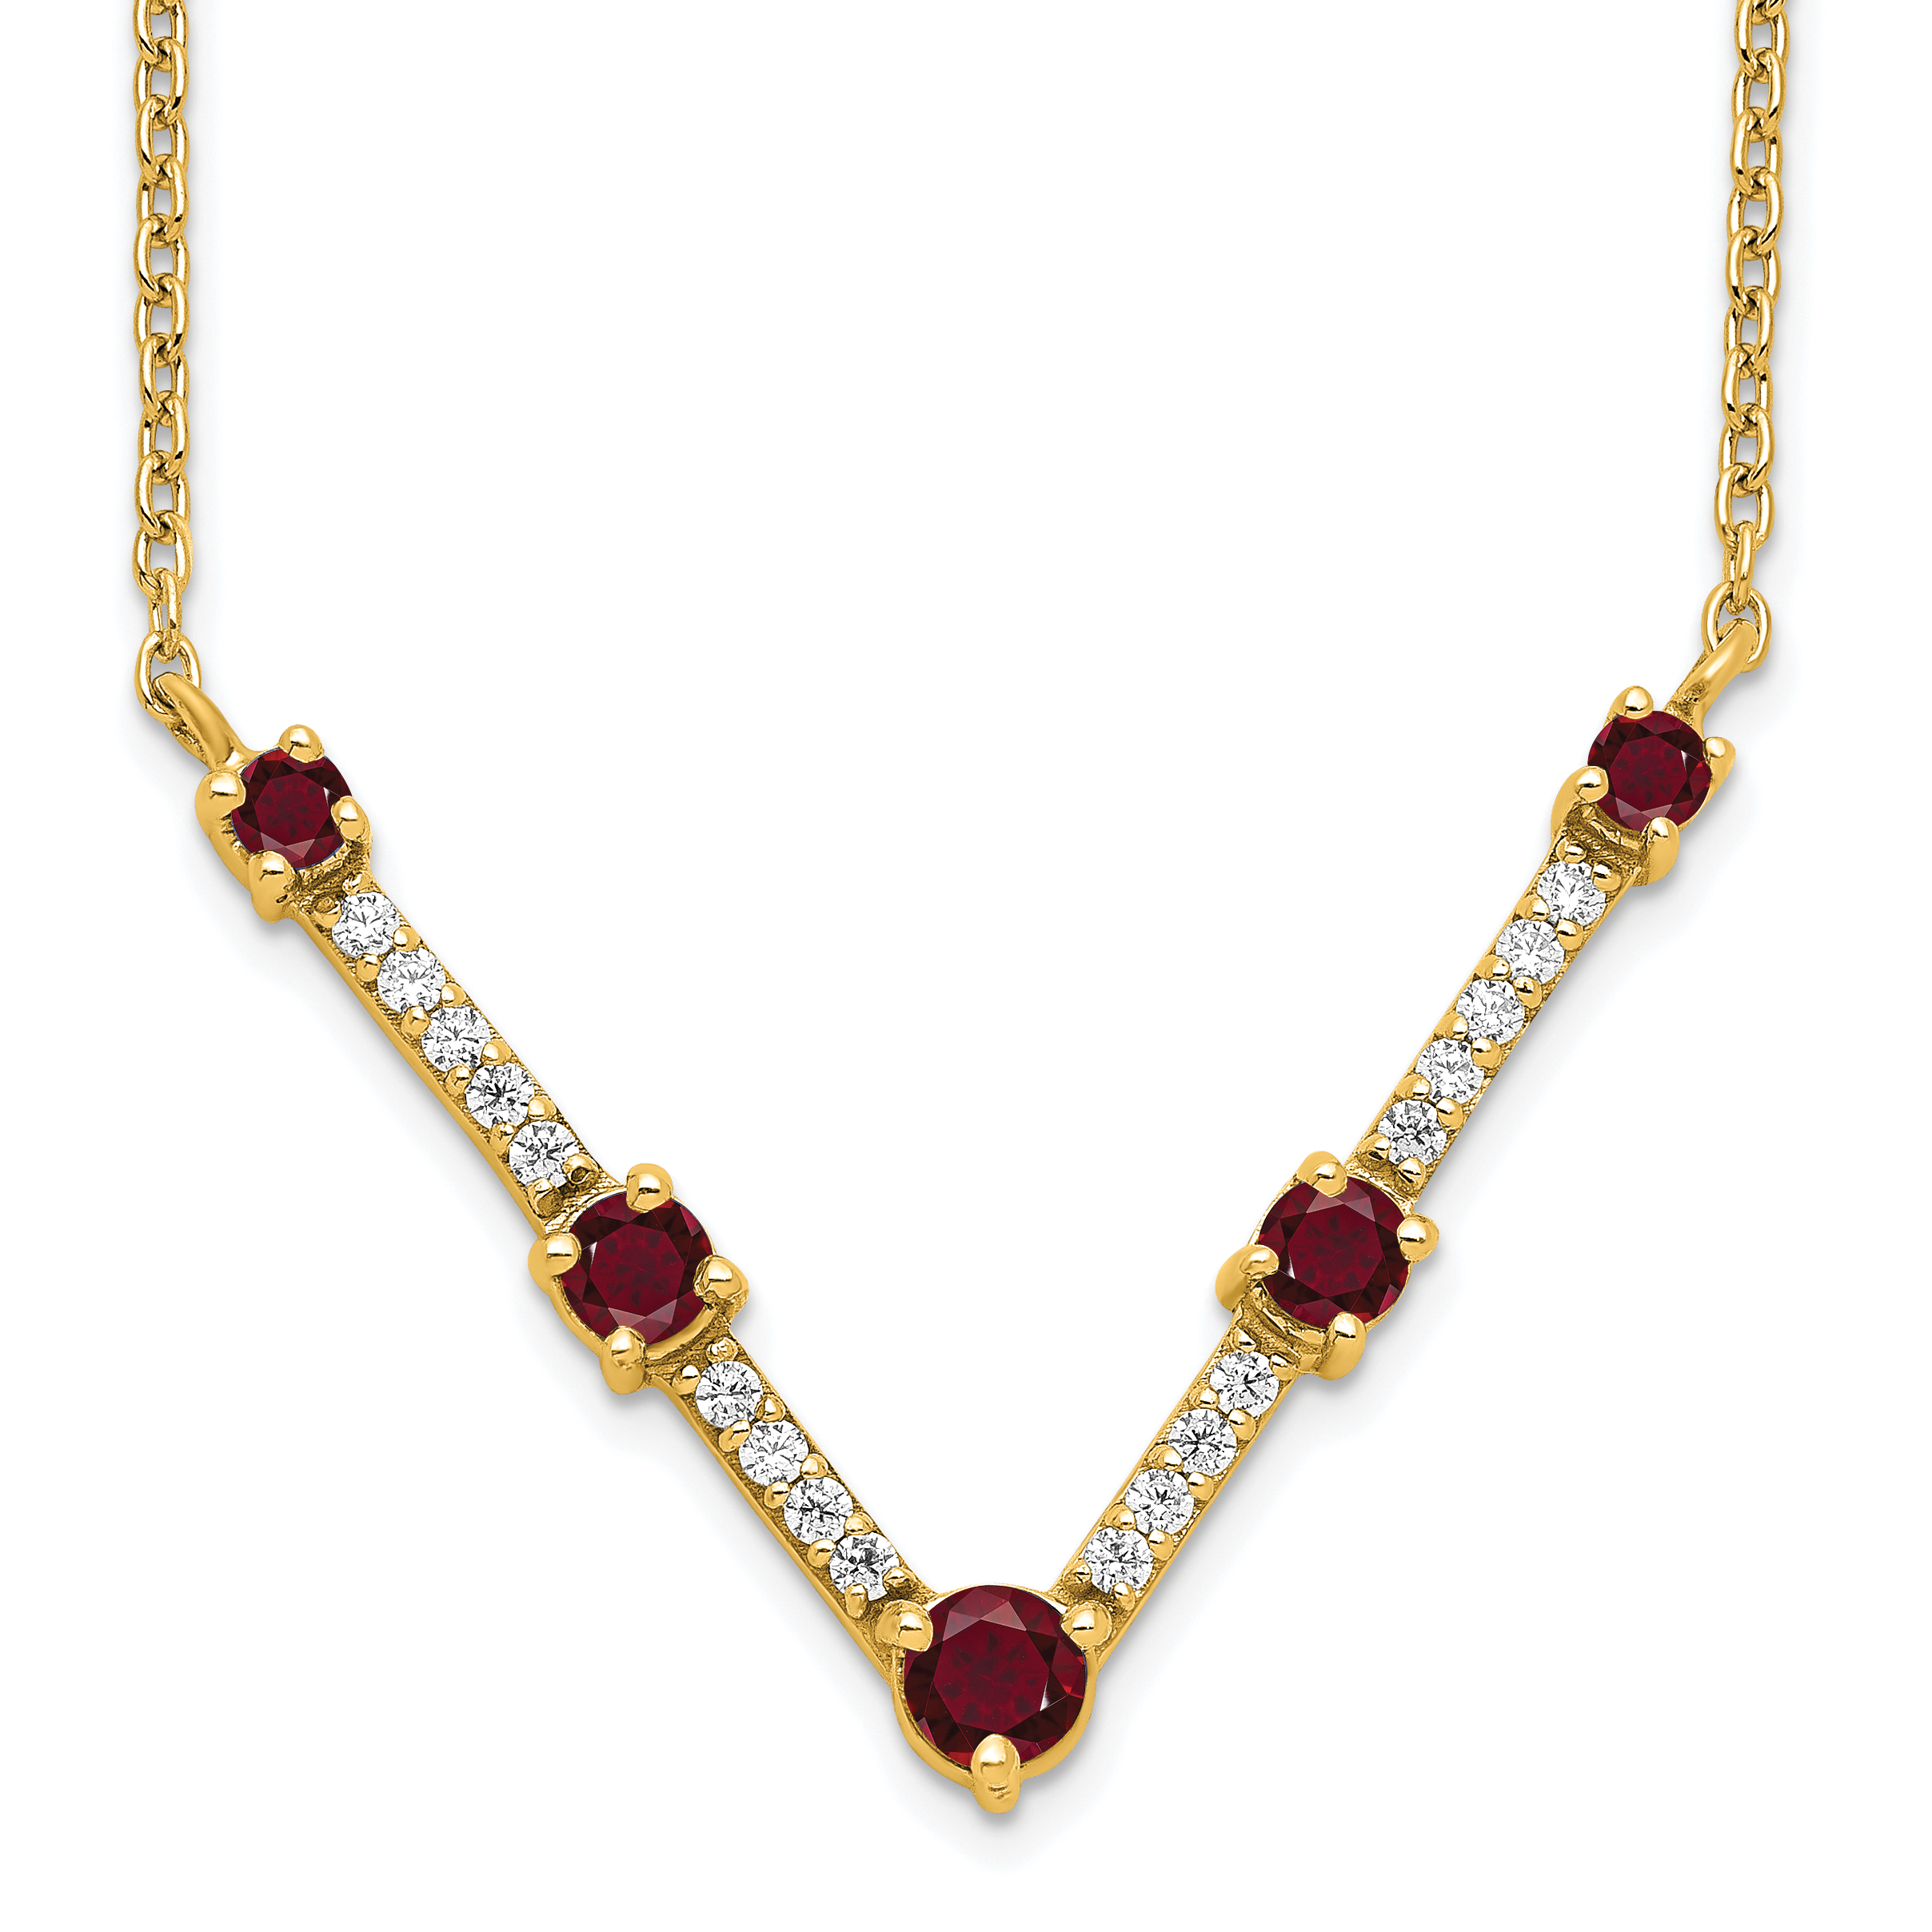 Mara Necklace | Stunning Lab-Grown Ruby Necklace | illi